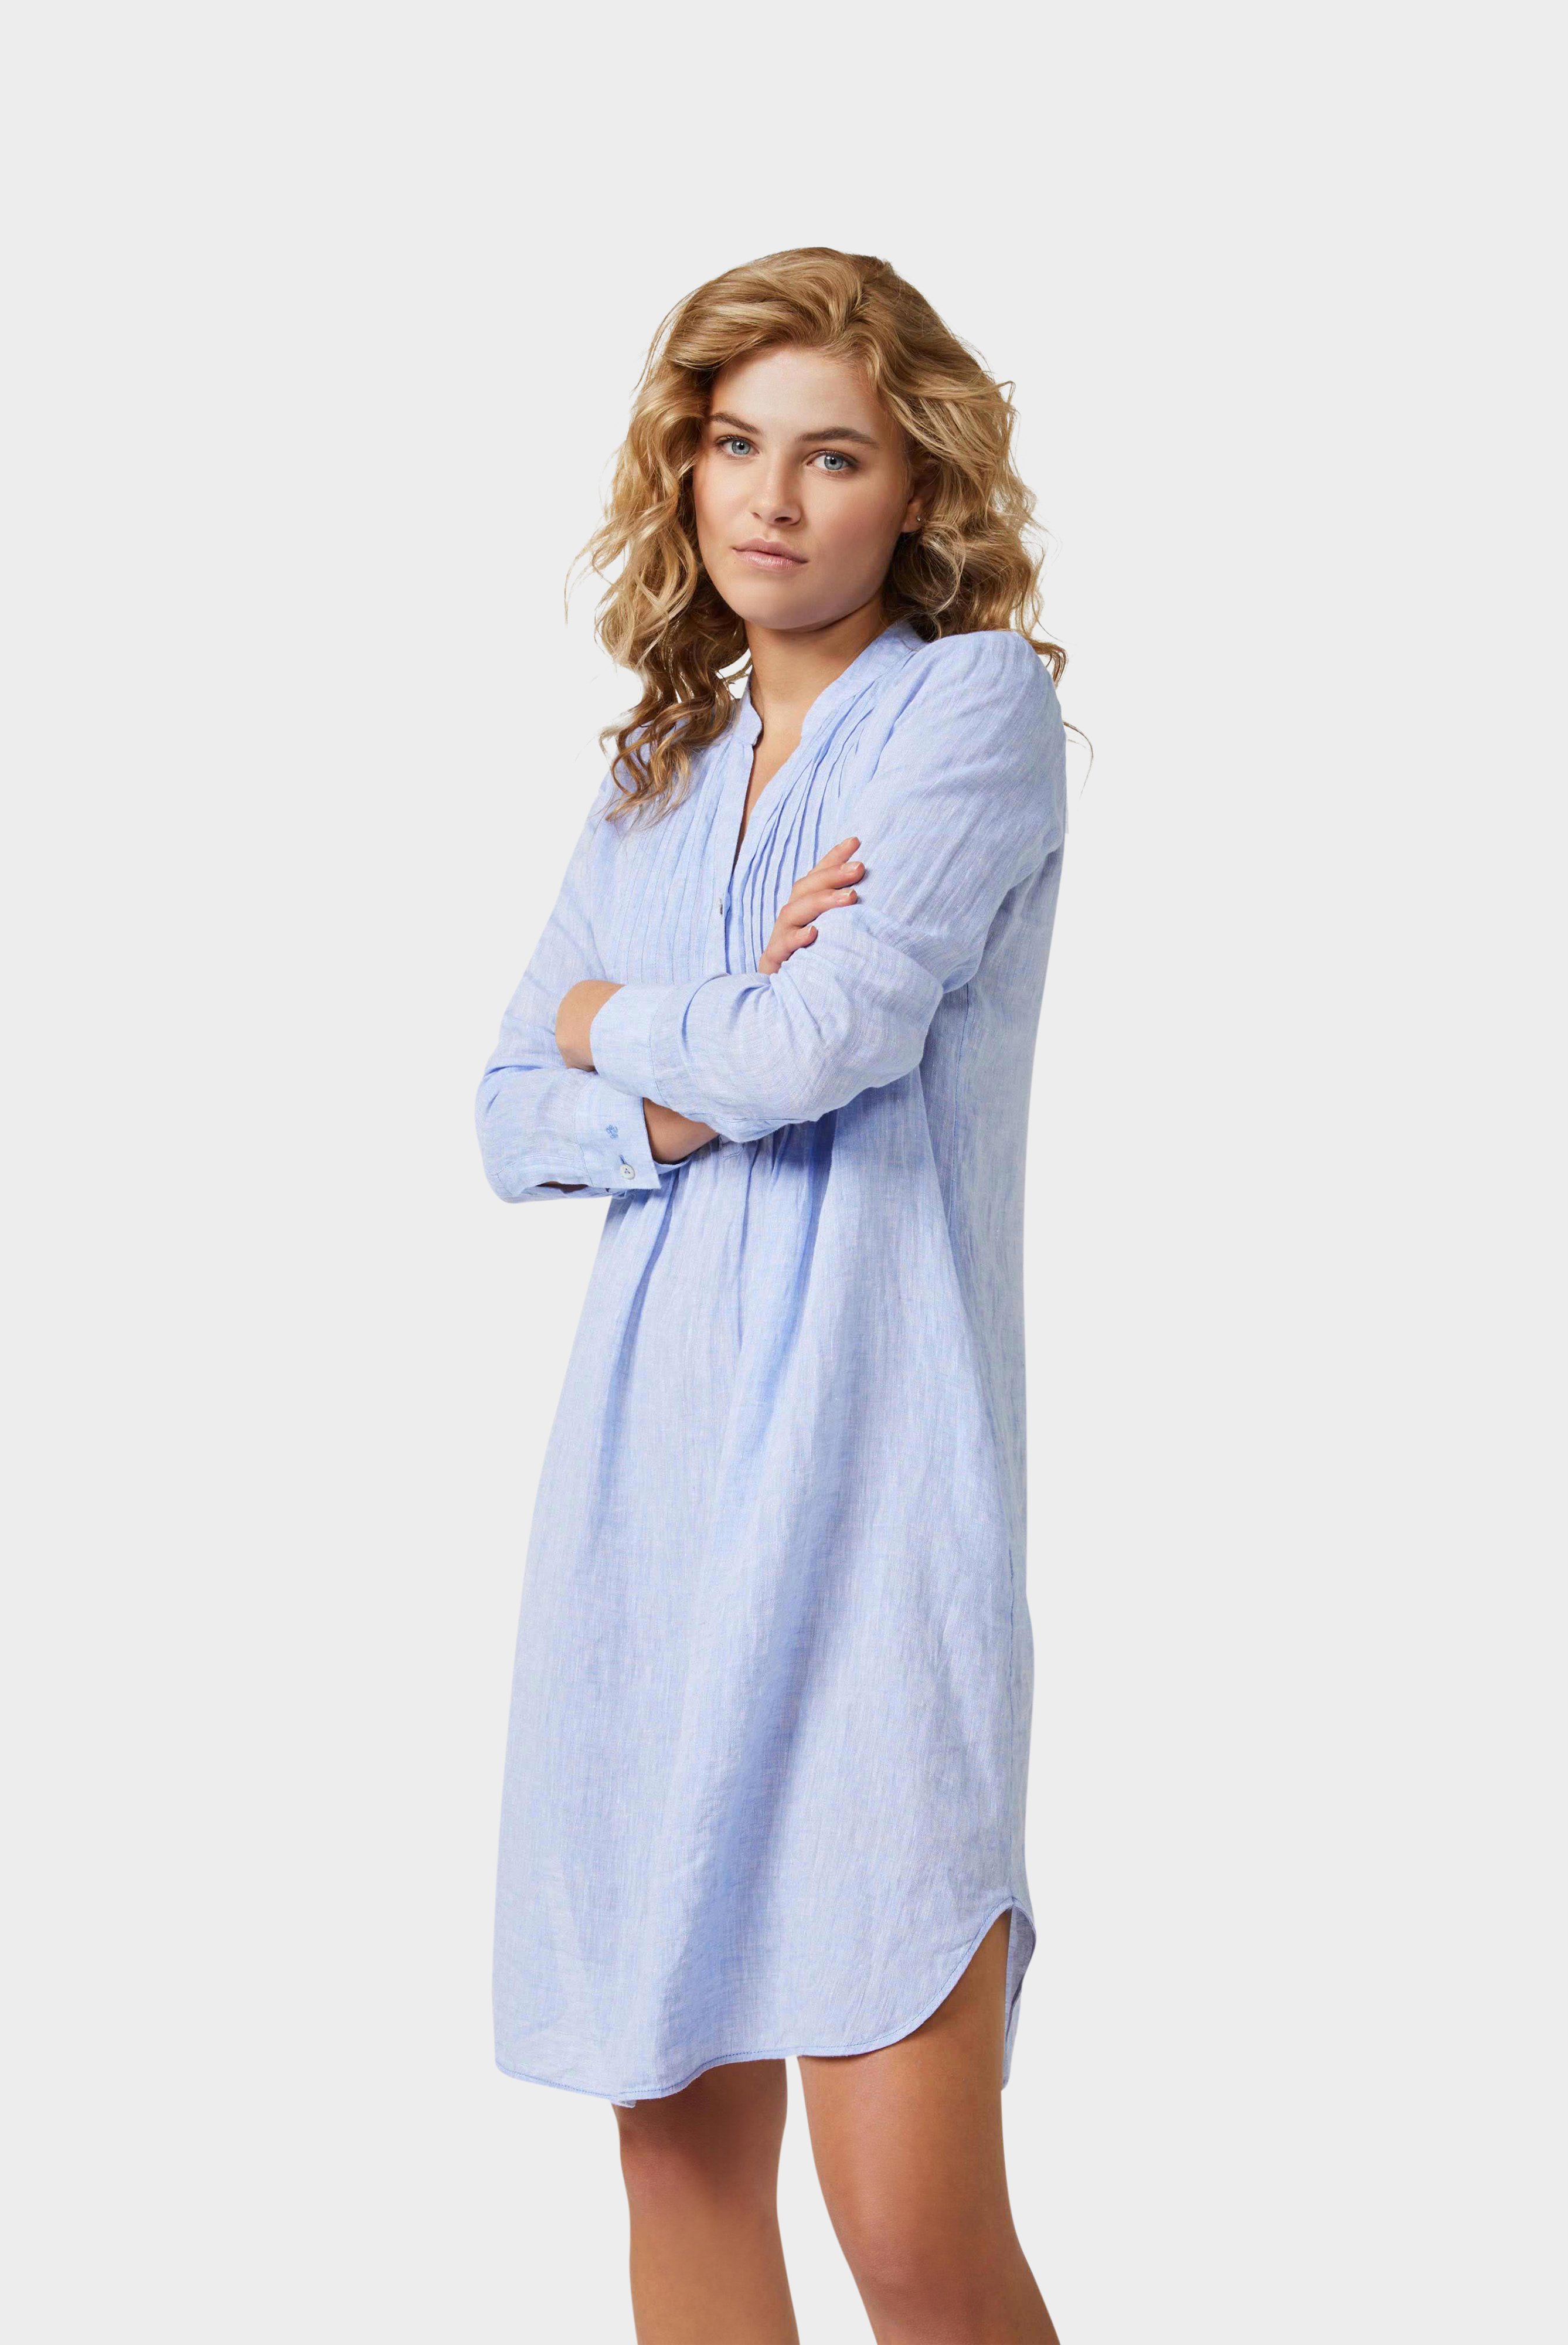 Knee-length dress with stand-up collar and ruffles made of linen